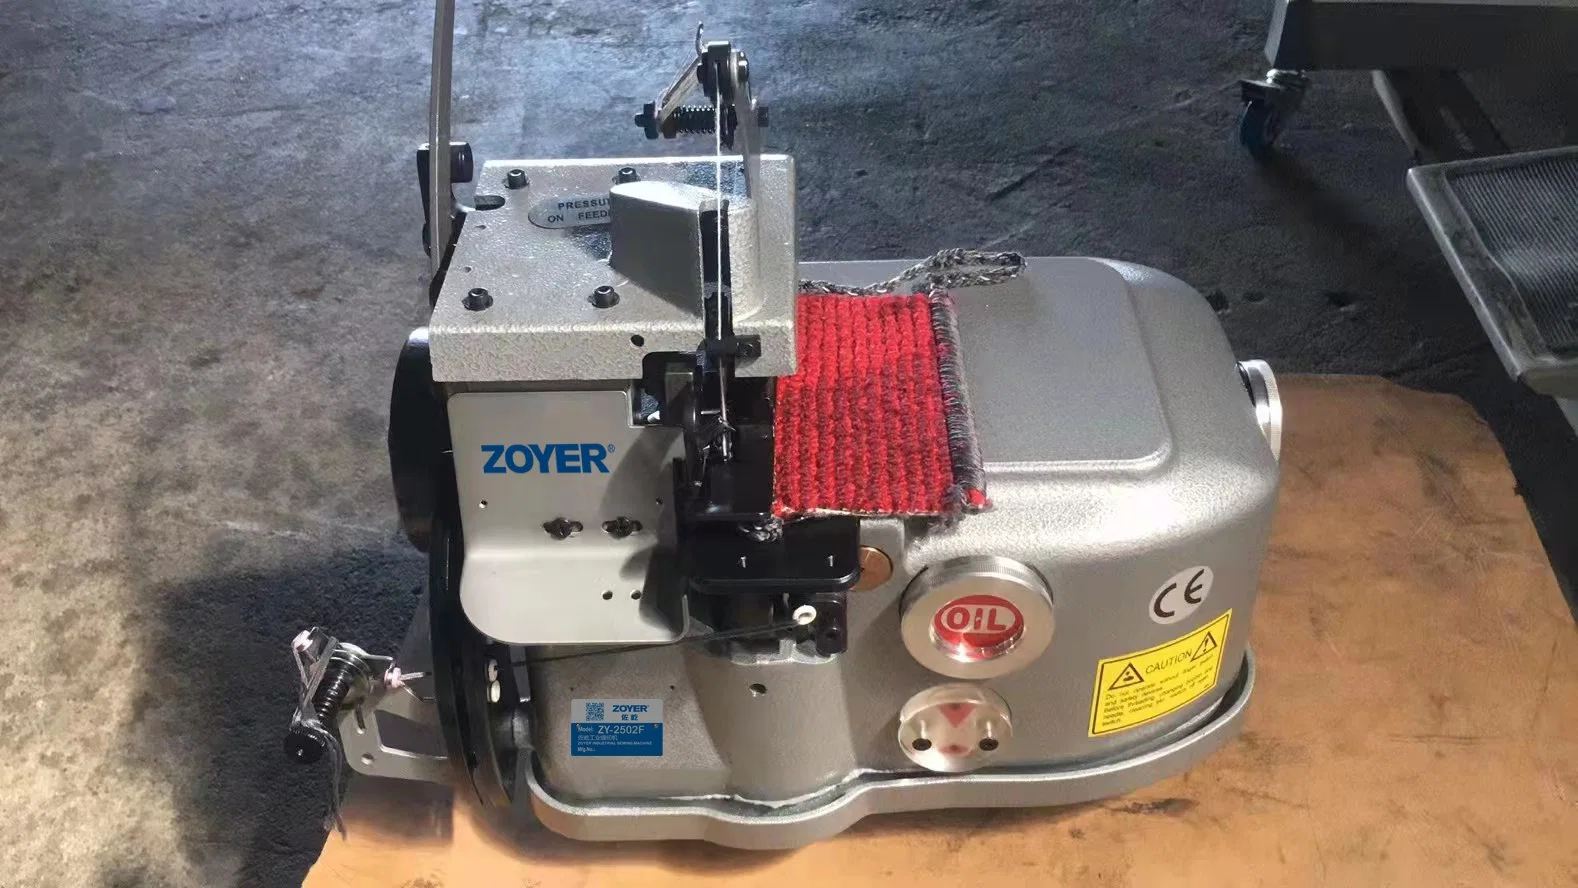 Zy2502f Zoyer Left Hand Special Carpet Overlock Sewing Machine